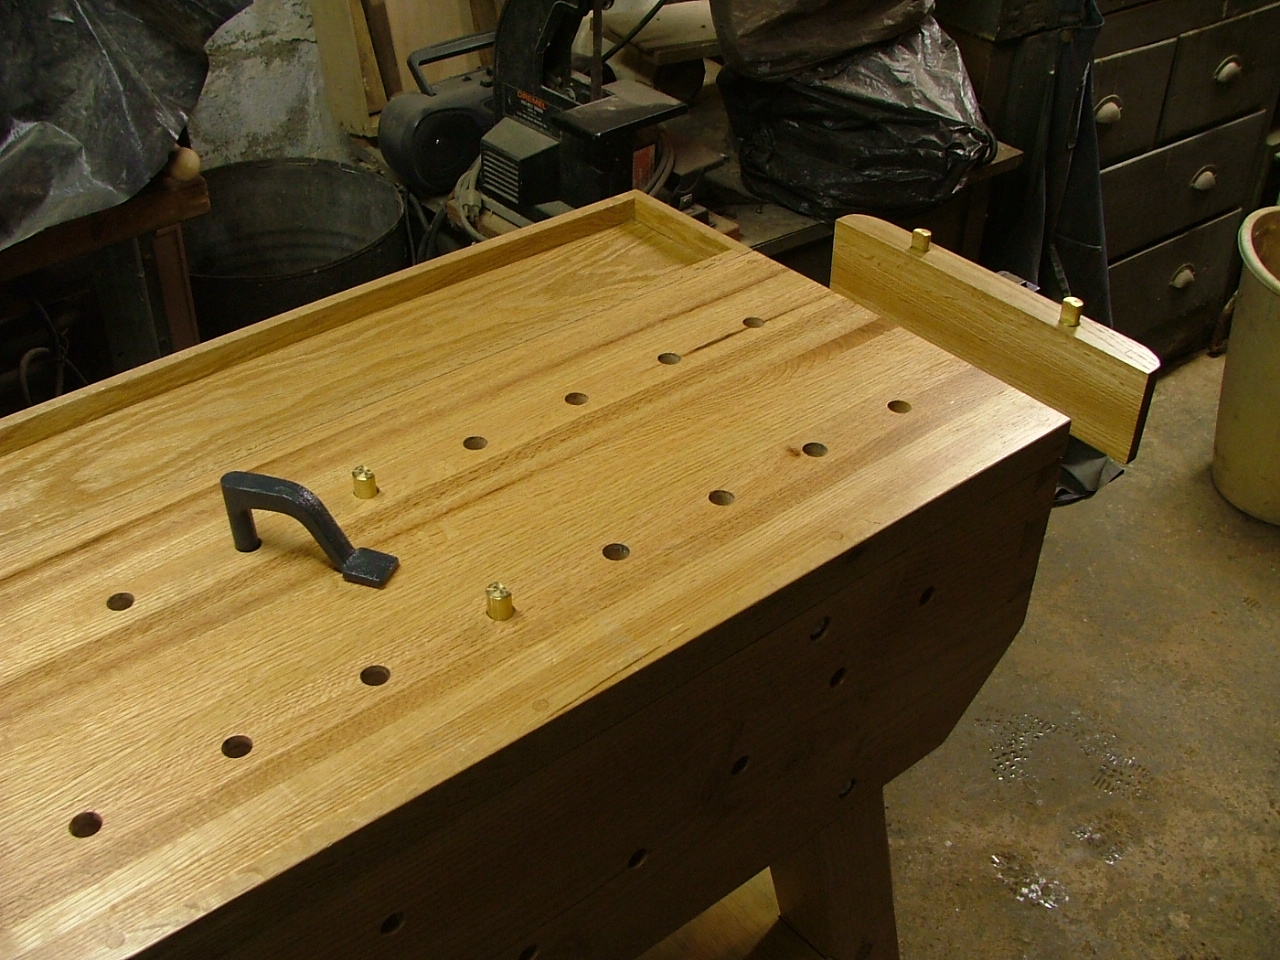 Woodworking bench dog holes